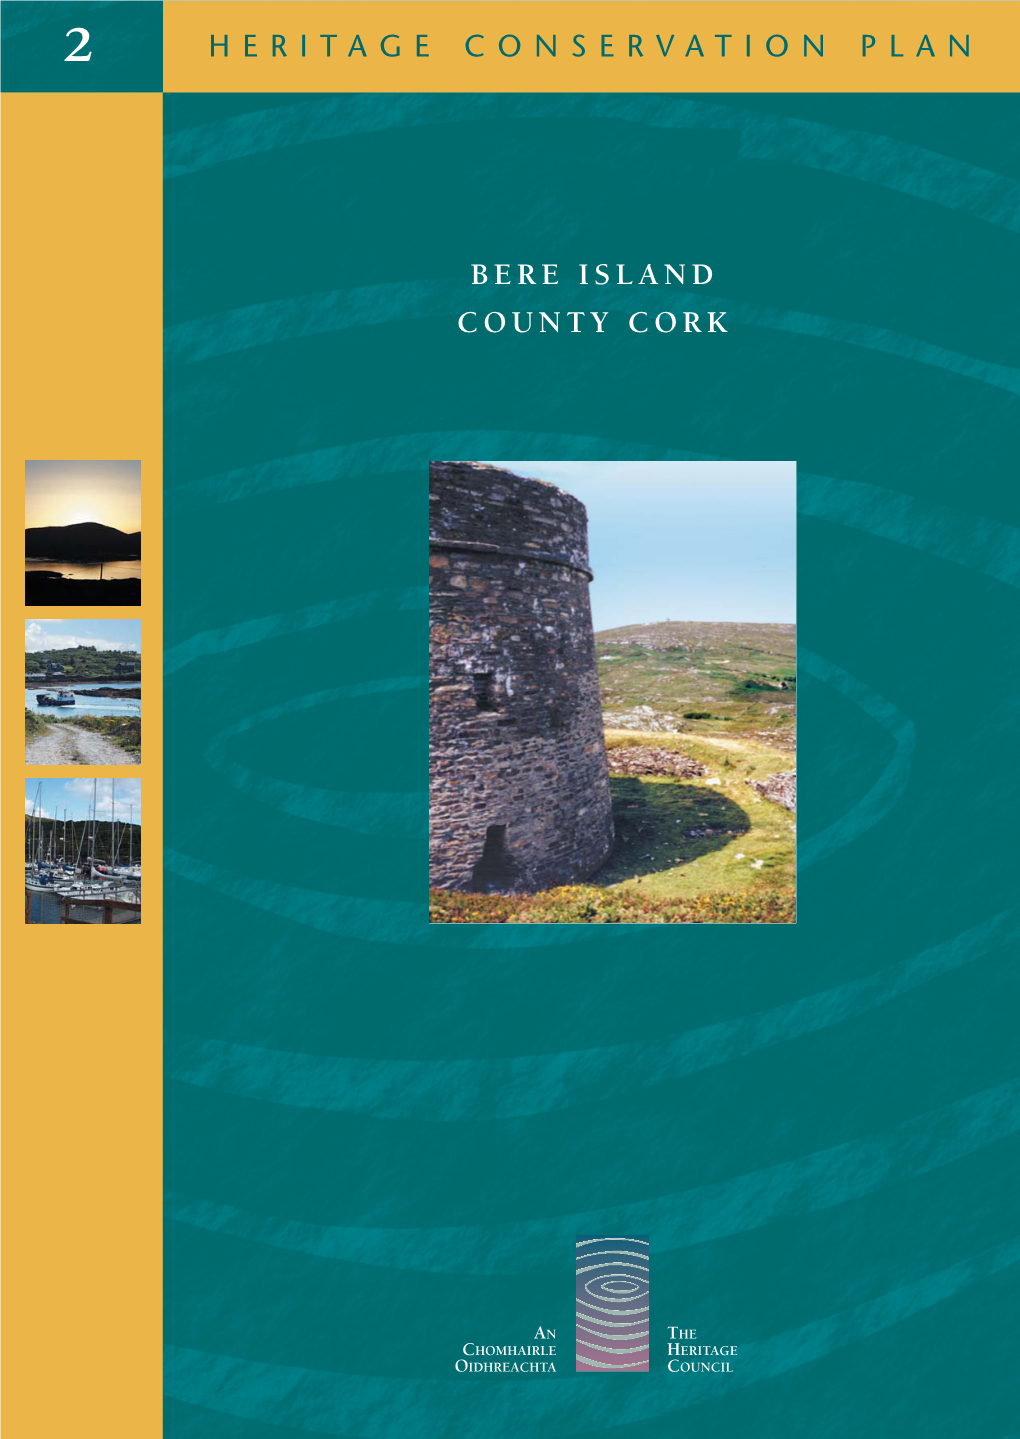 Bere Island Conservation Plan Is Dedicated to the Memory of Mr John G